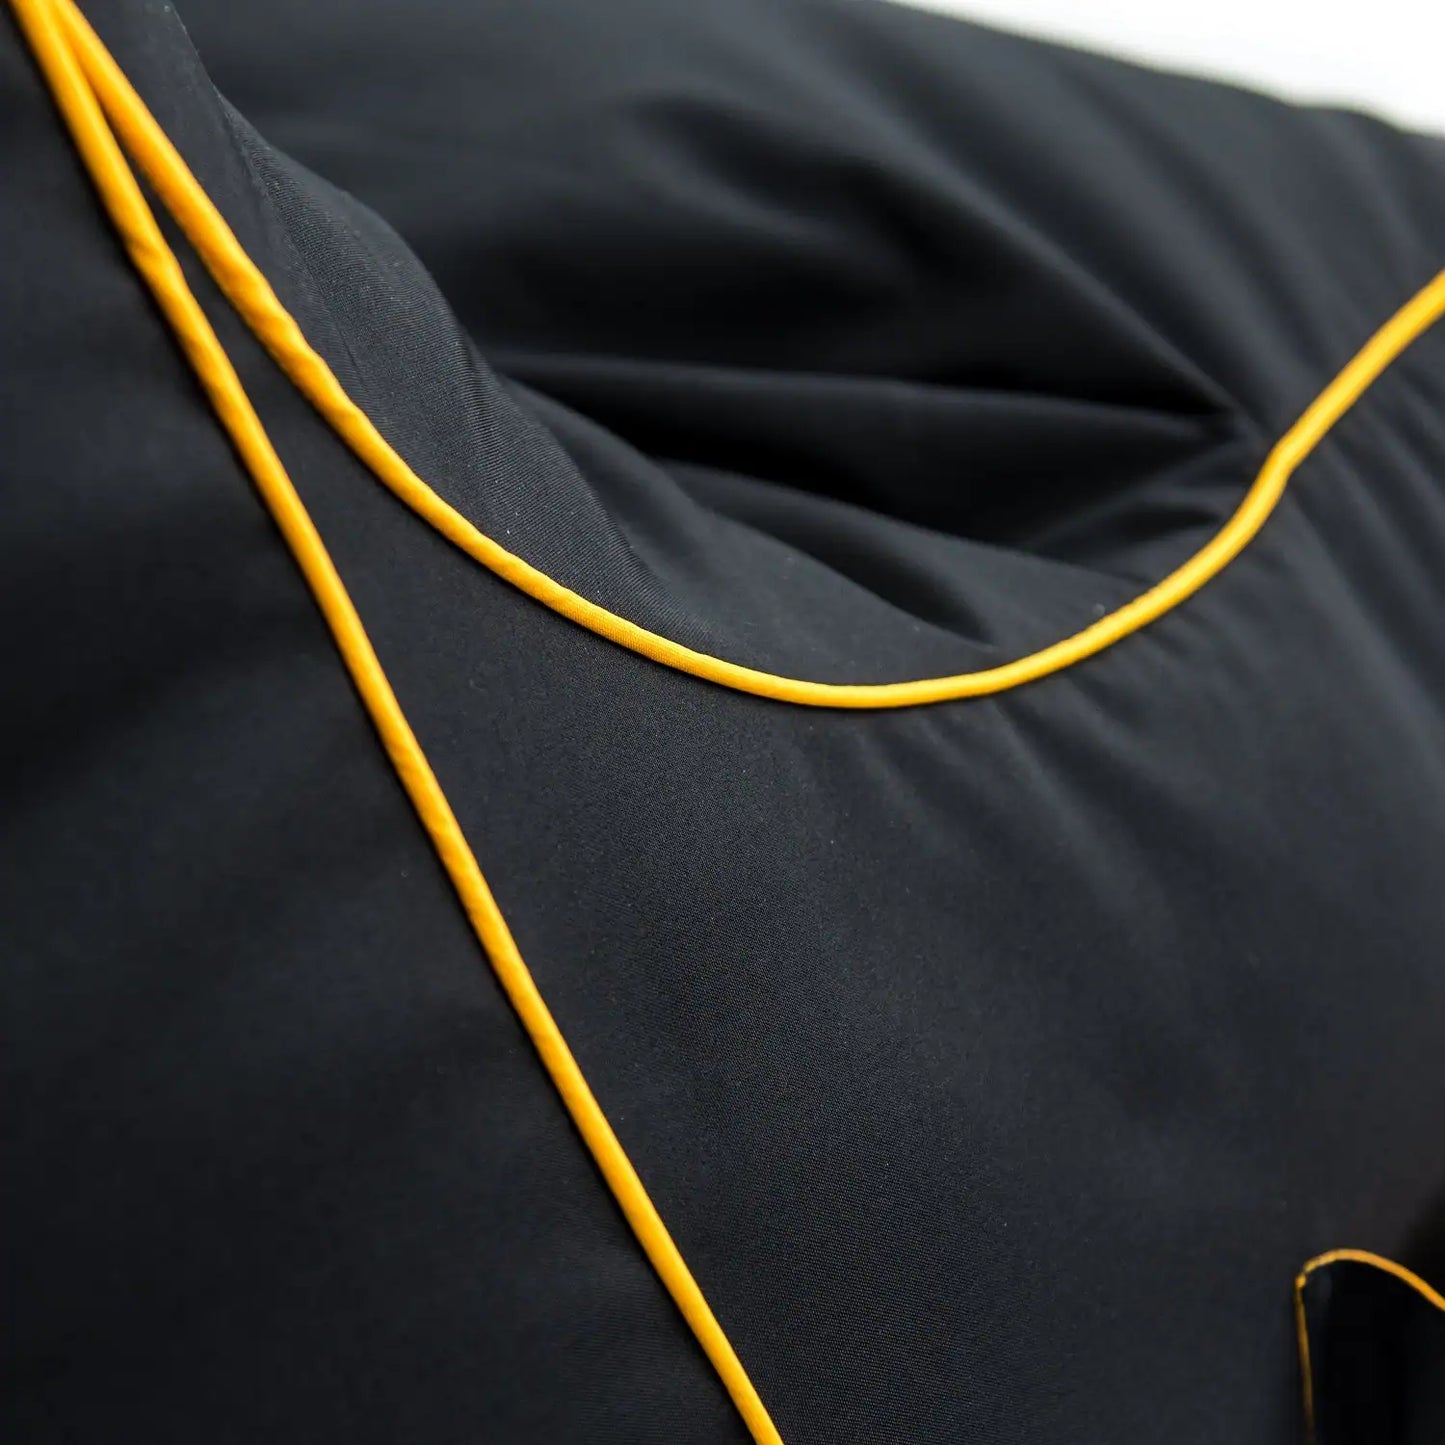 A close-up photo of a black fabric with yellow stitching.